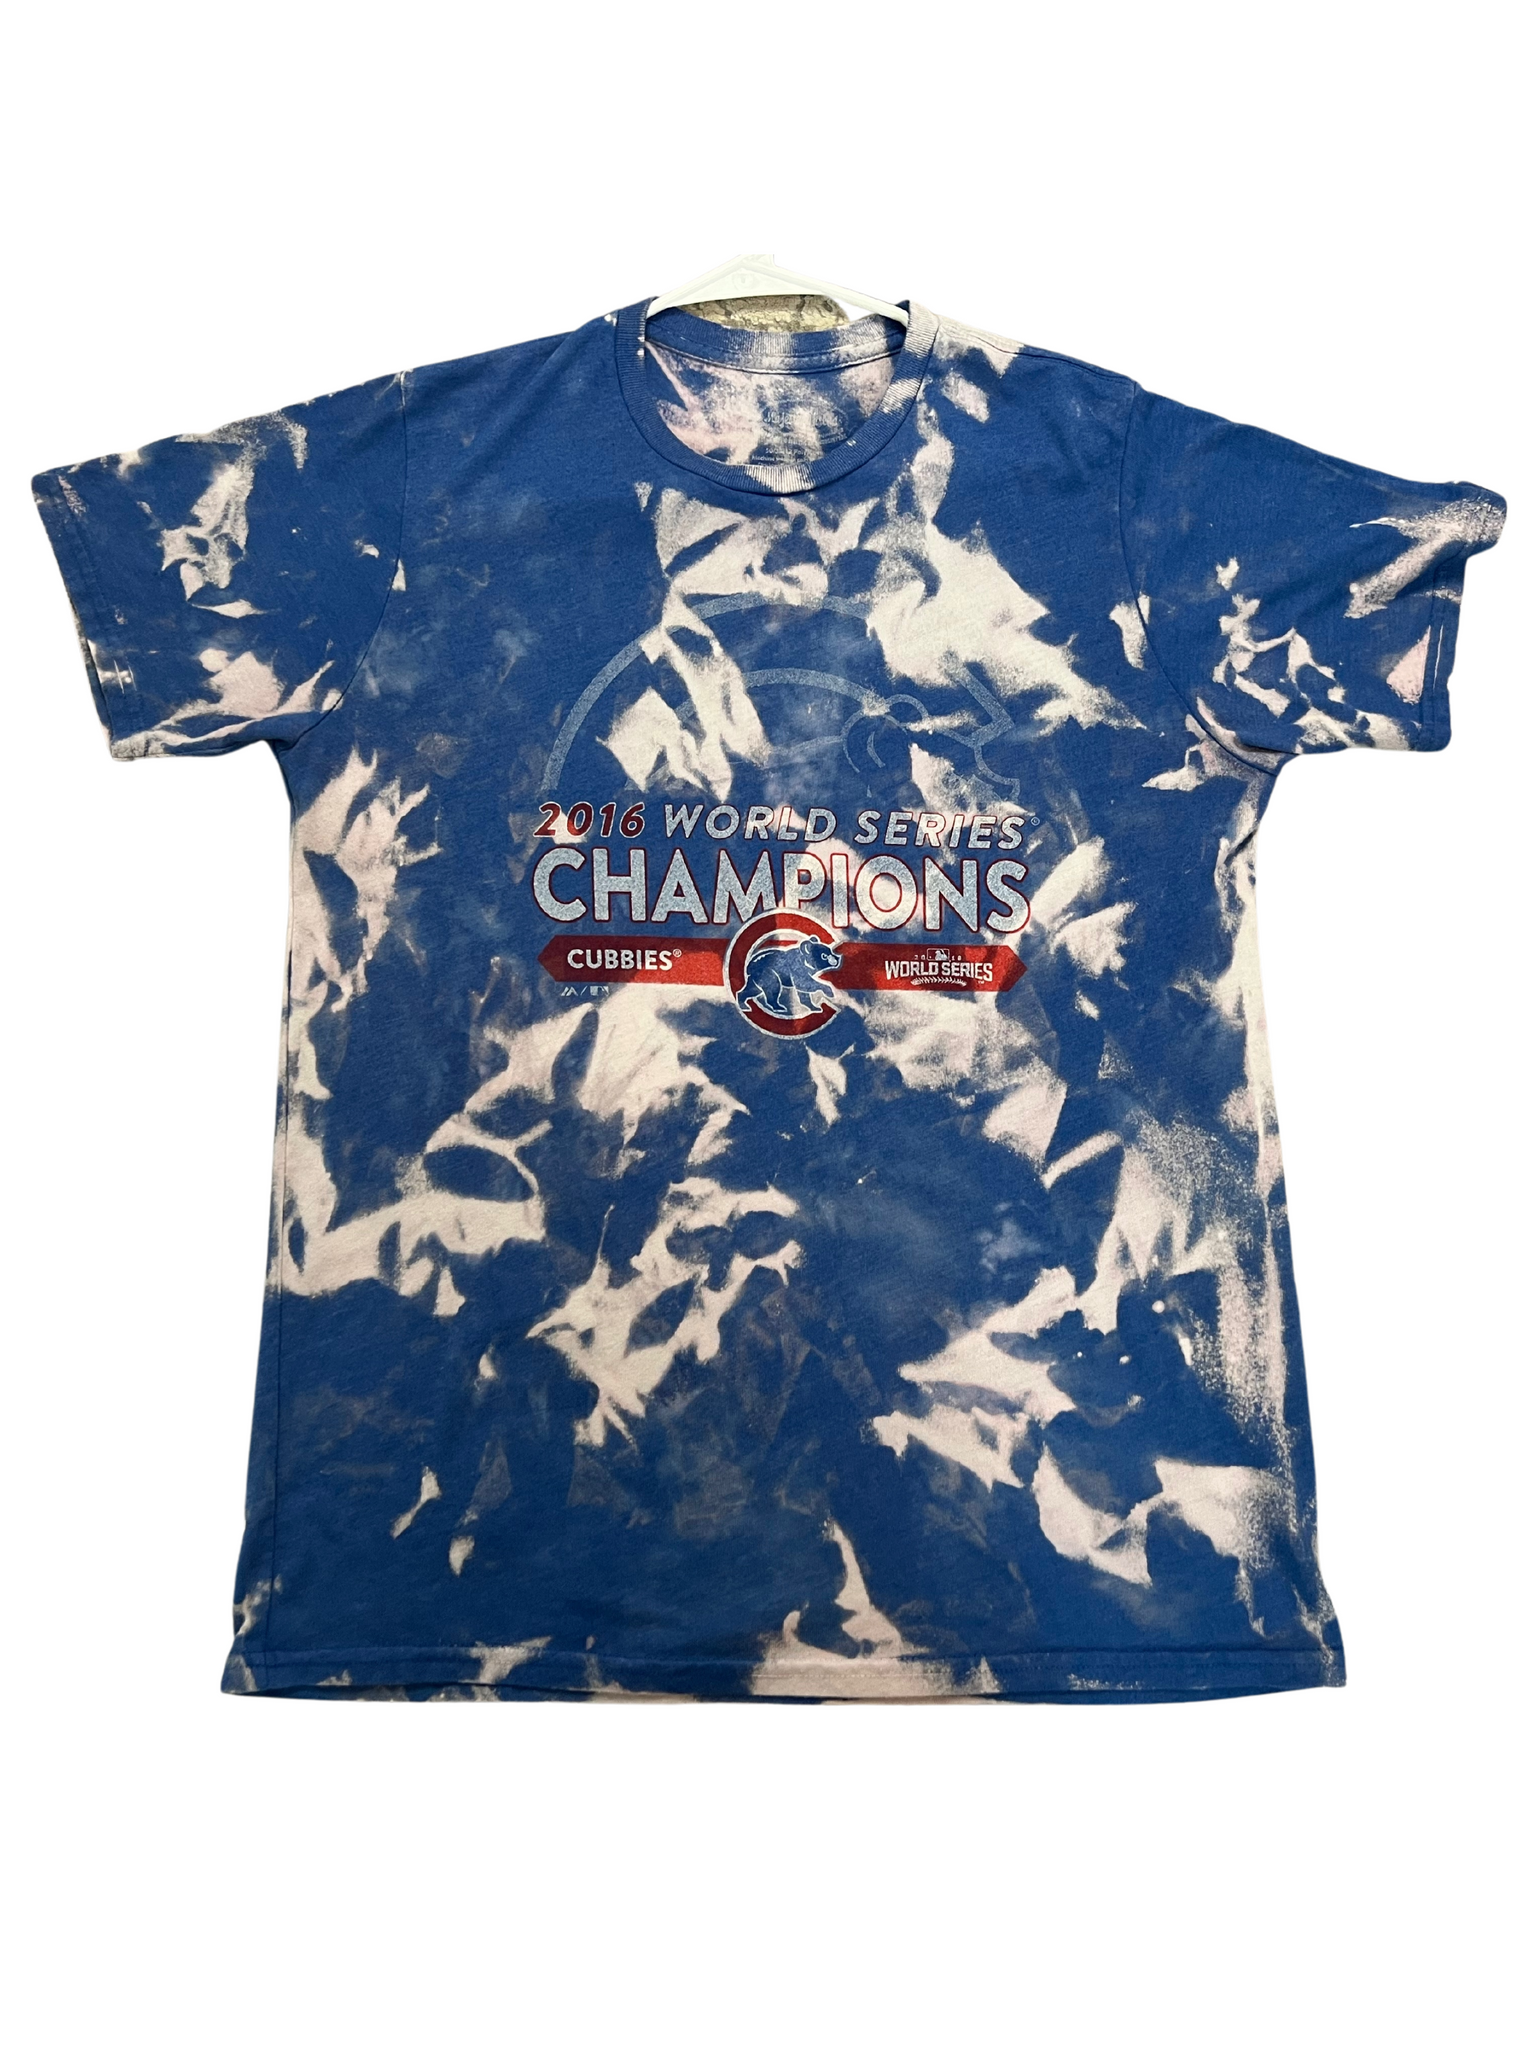 Chicago Cubs 2016 World Series Champs T-Shirt